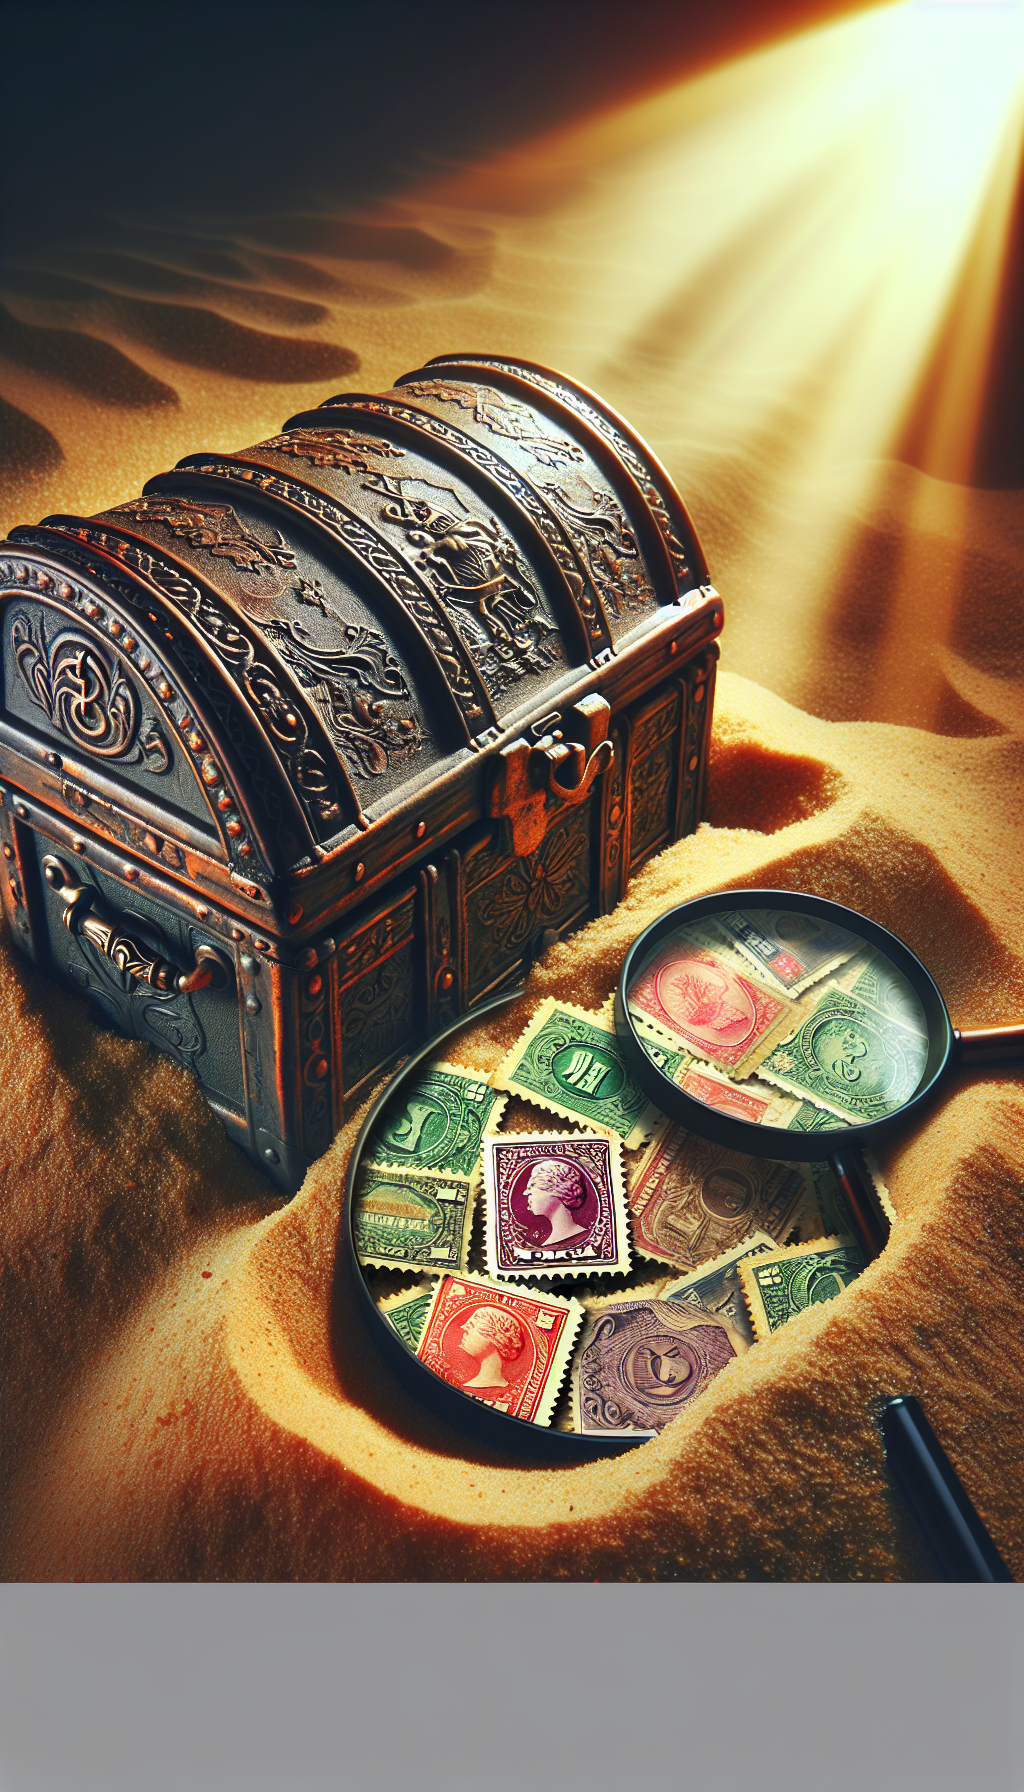 An illustration of an old, ornate treasure chest partially buried in sandy soil, with the lid ajar revealing a glow and rare, vintage stamps spilling onto the ground. Among the stamps, a magnifying glass highlights one, casting a shadow shaped like a dollar sign, symbolizing its immense value. The scene smoothly transitions from sepia tones to vibrant colors, suggesting historical depth and modern allure.